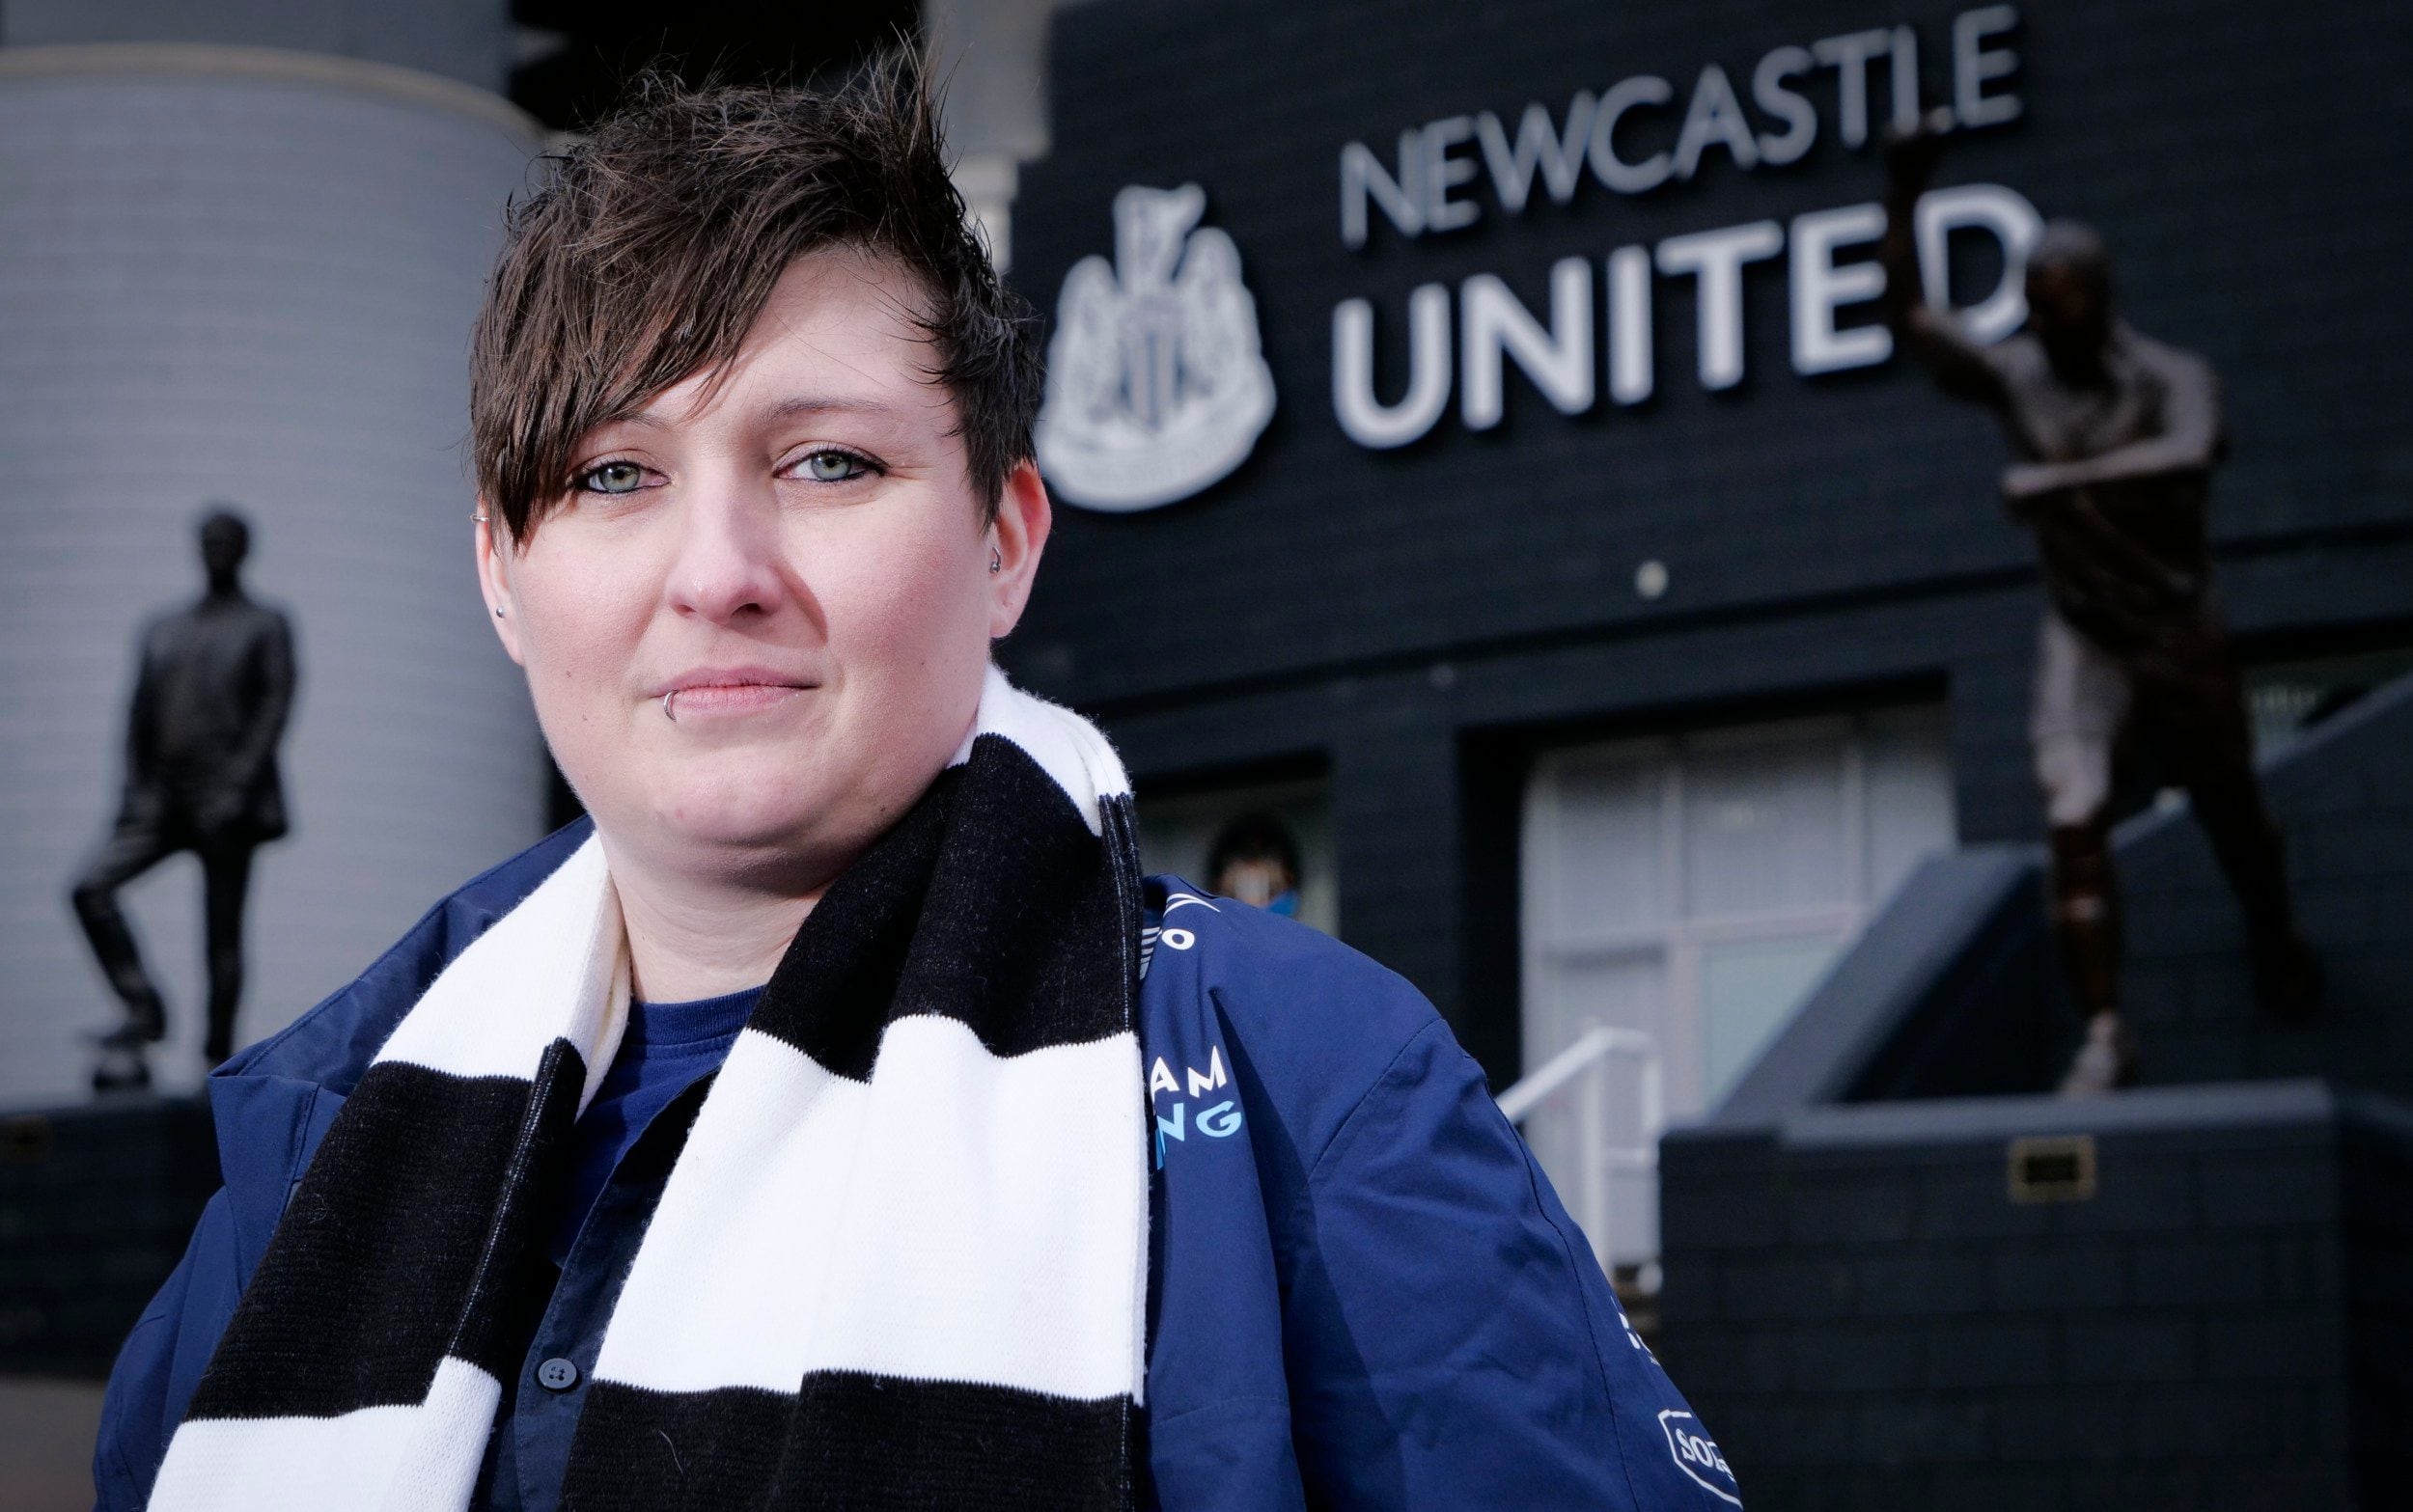 newcastle united fan banned over gender tweets launches legal action against club